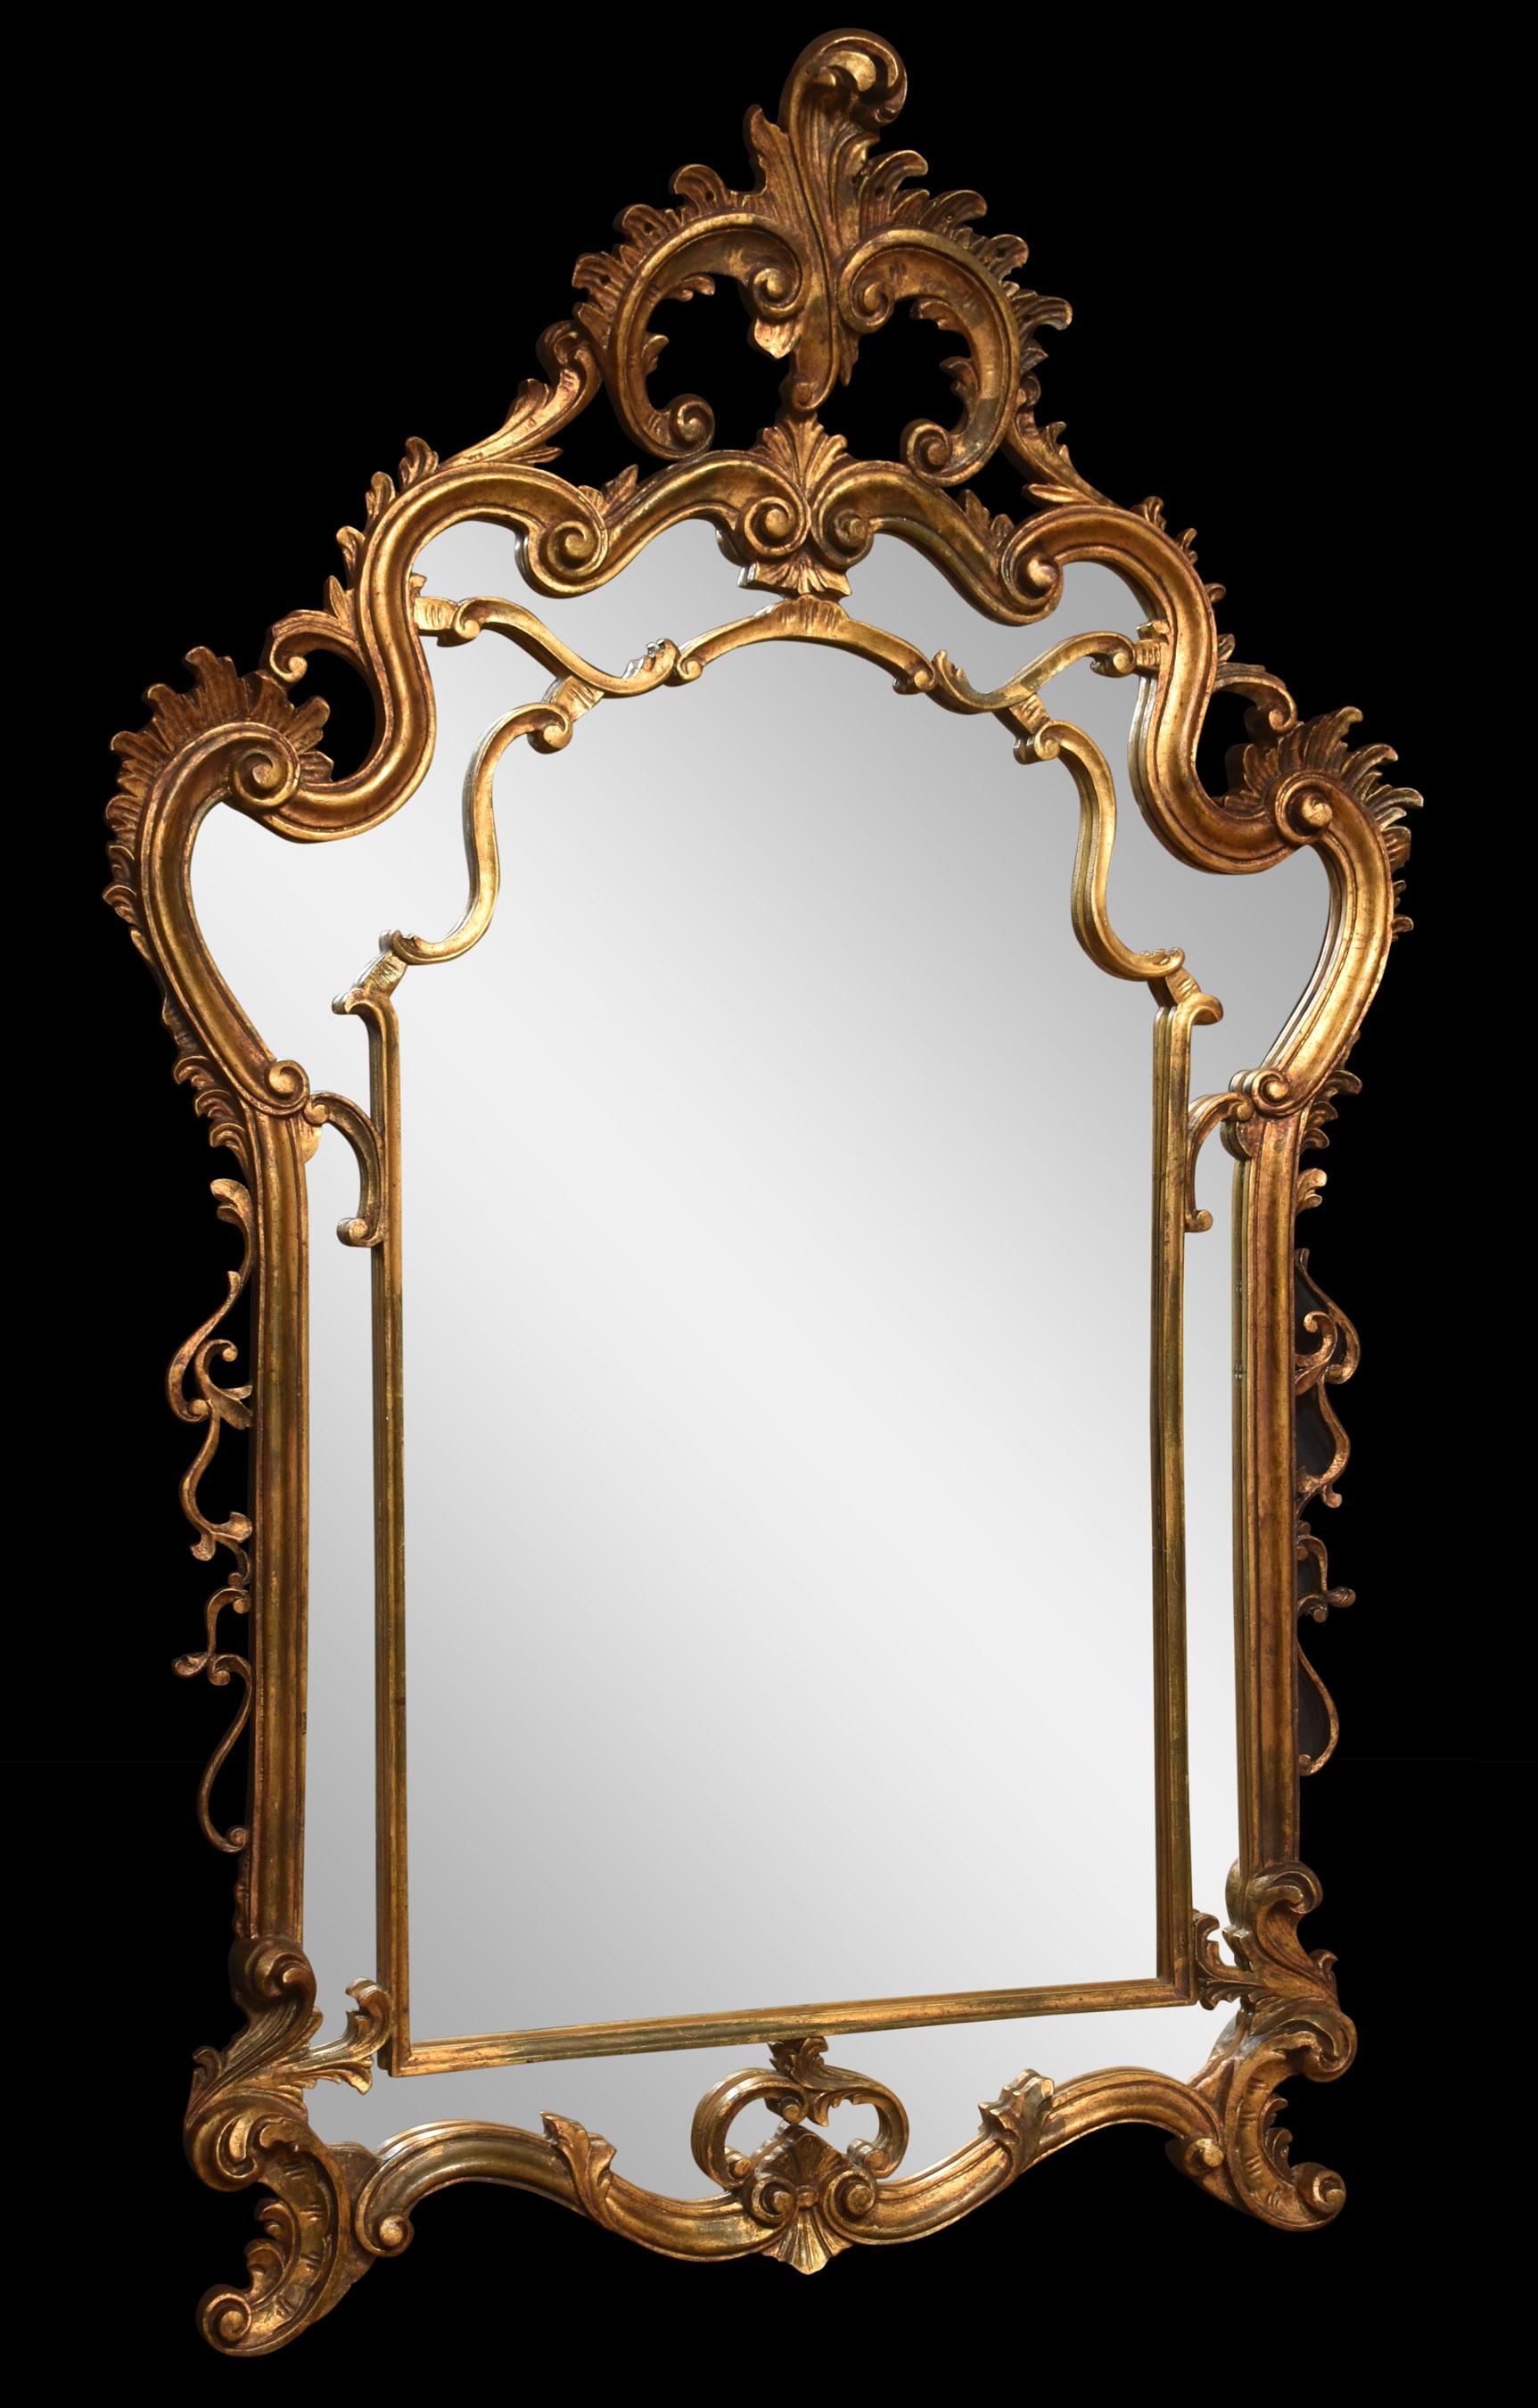 British 18th Century Style Giltwood Wall Mirror For Sale